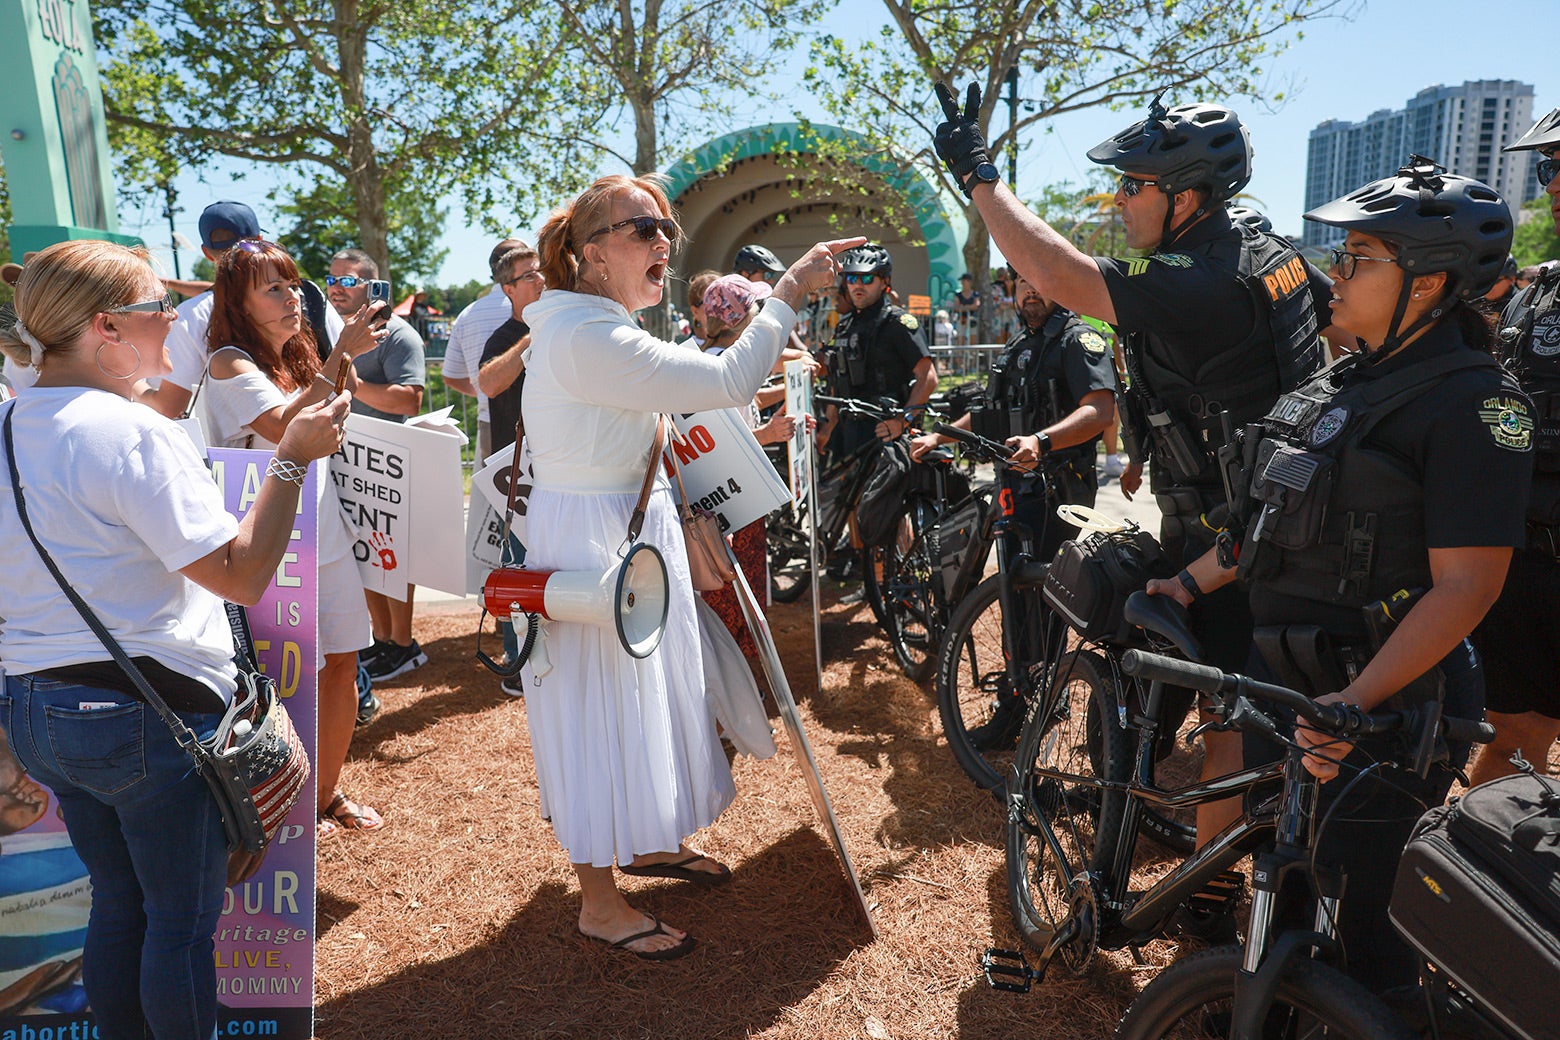 A woman in white yells at police at an anti-abortion rally.